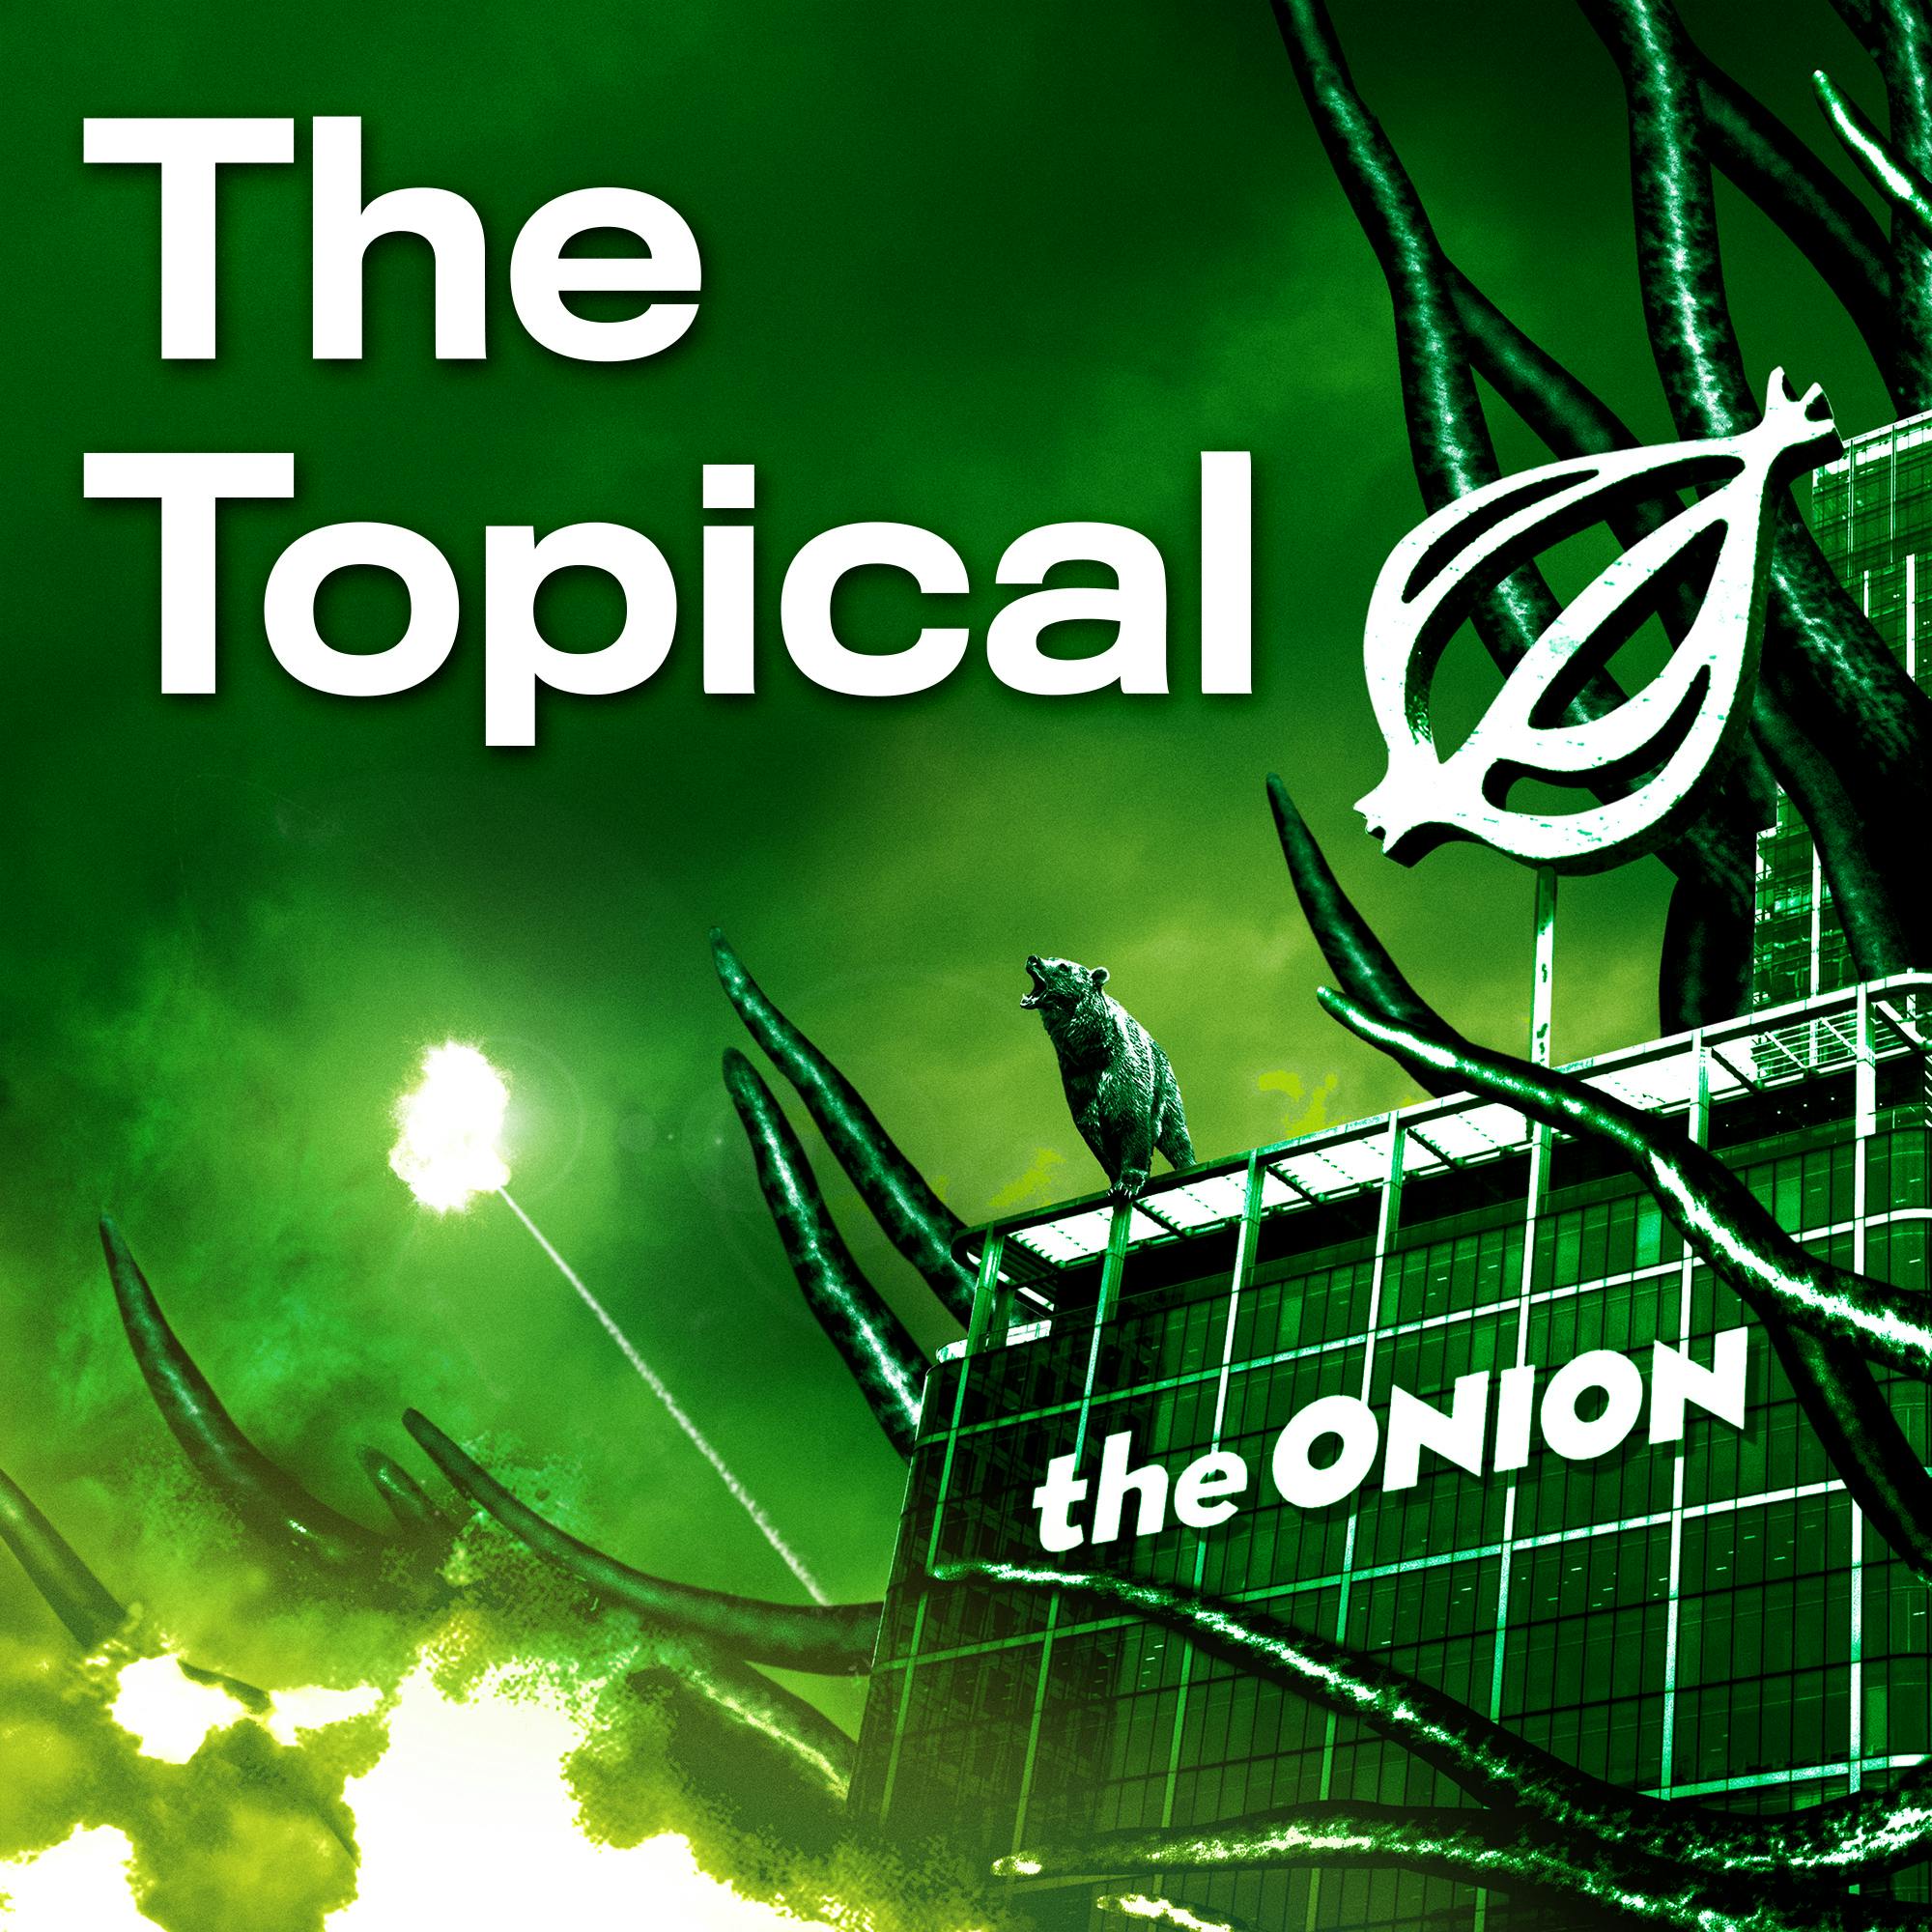 TheOnion.com Has Been Designated As A Pandemic Shelter In The Event That Covid-19 Could Spread Through The Internet